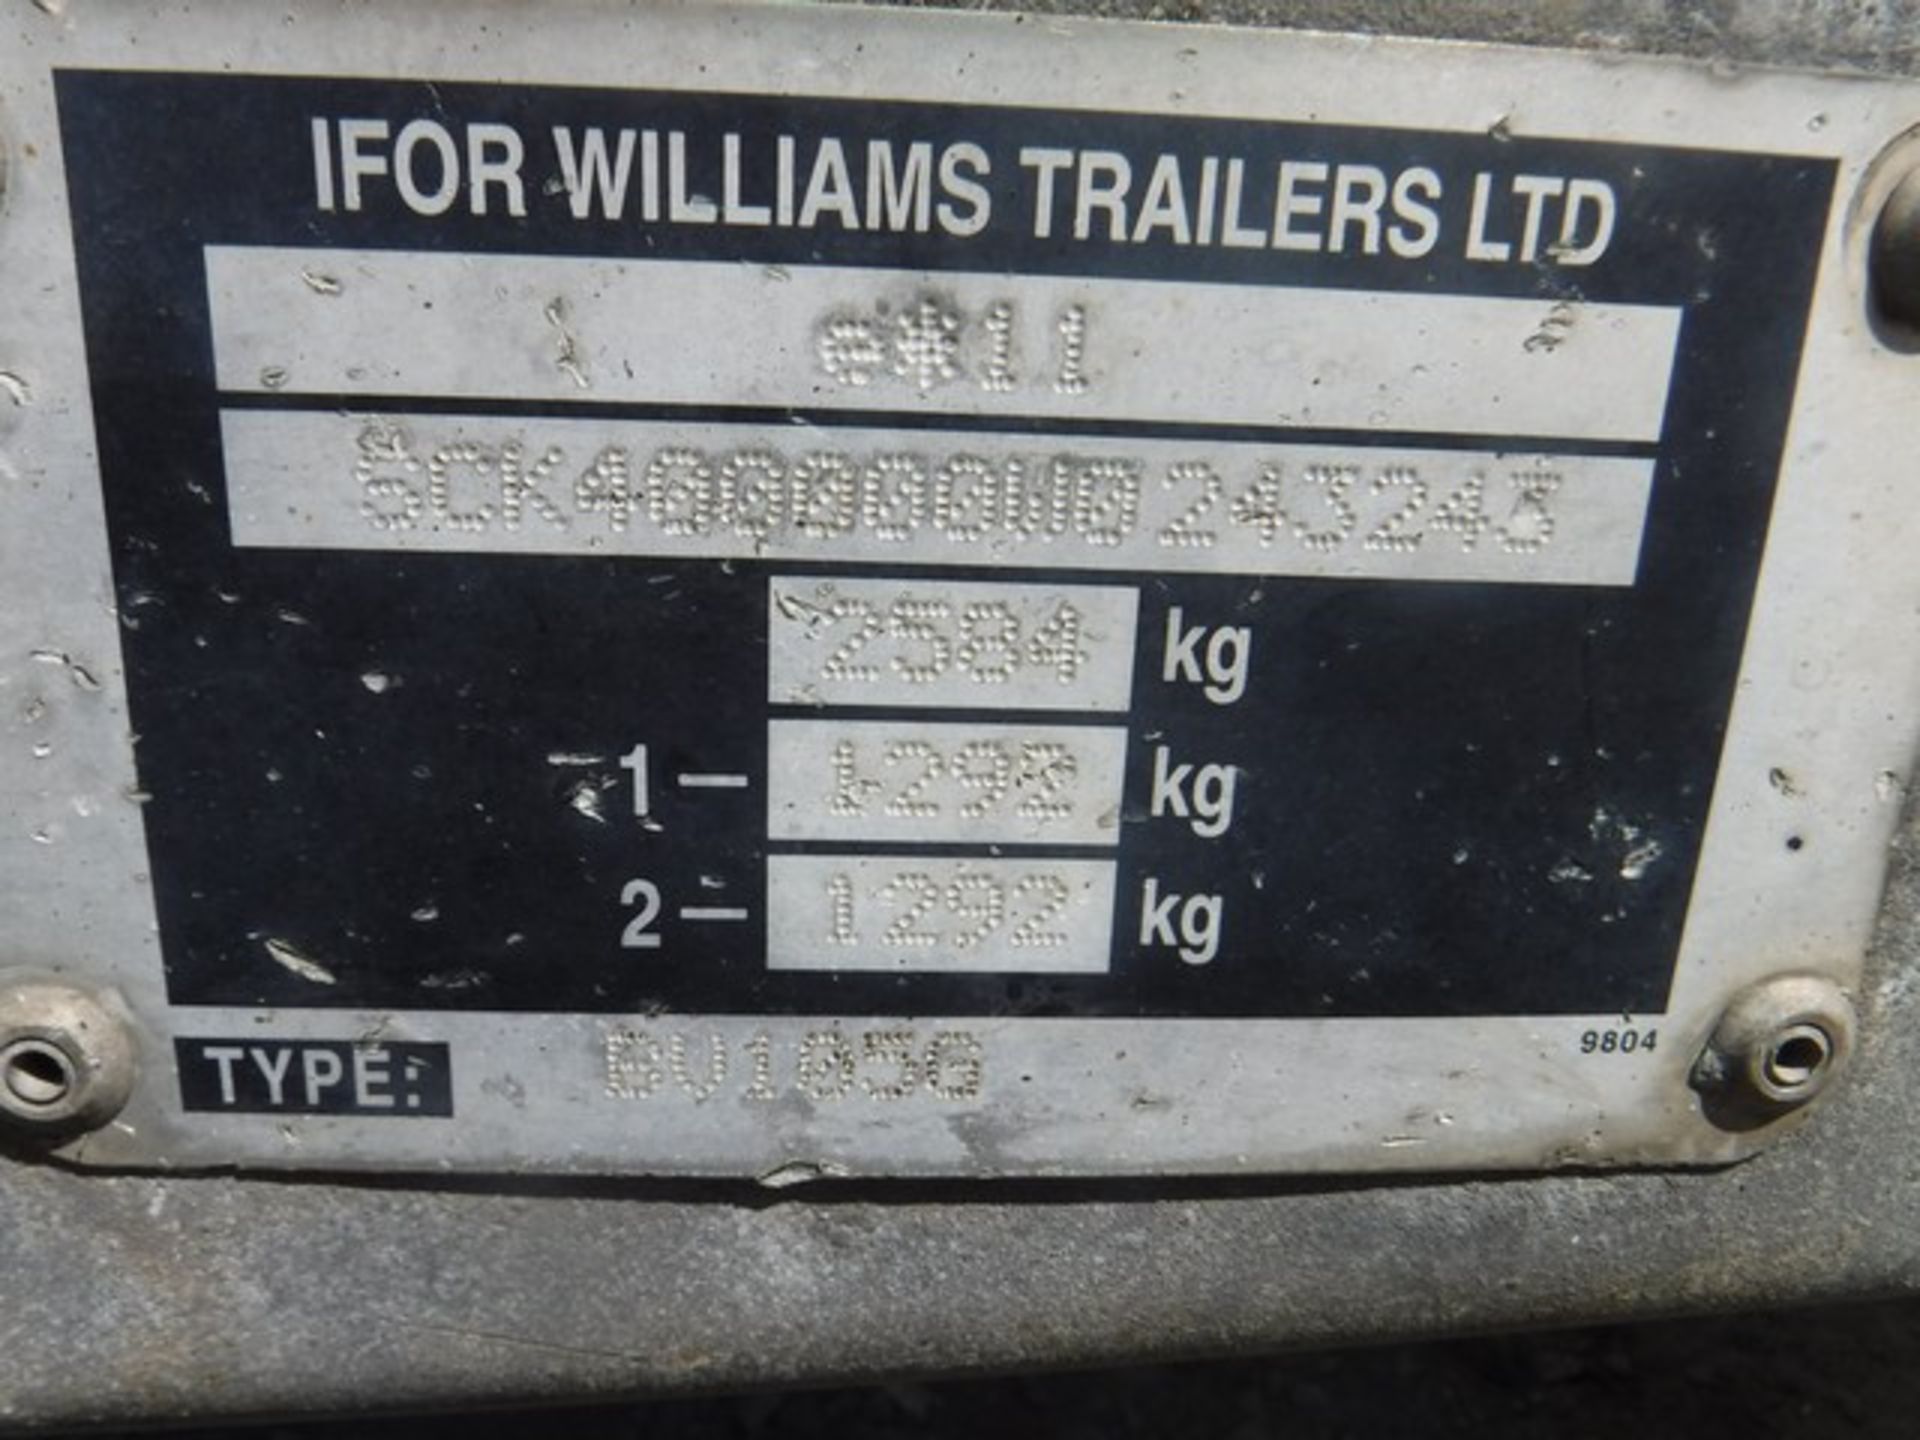 IFOR WILLIAMS 10' x 5' twin axle box trailer. Fitted with power points. VIN WO243243. Asset no. 758- - Image 5 of 6